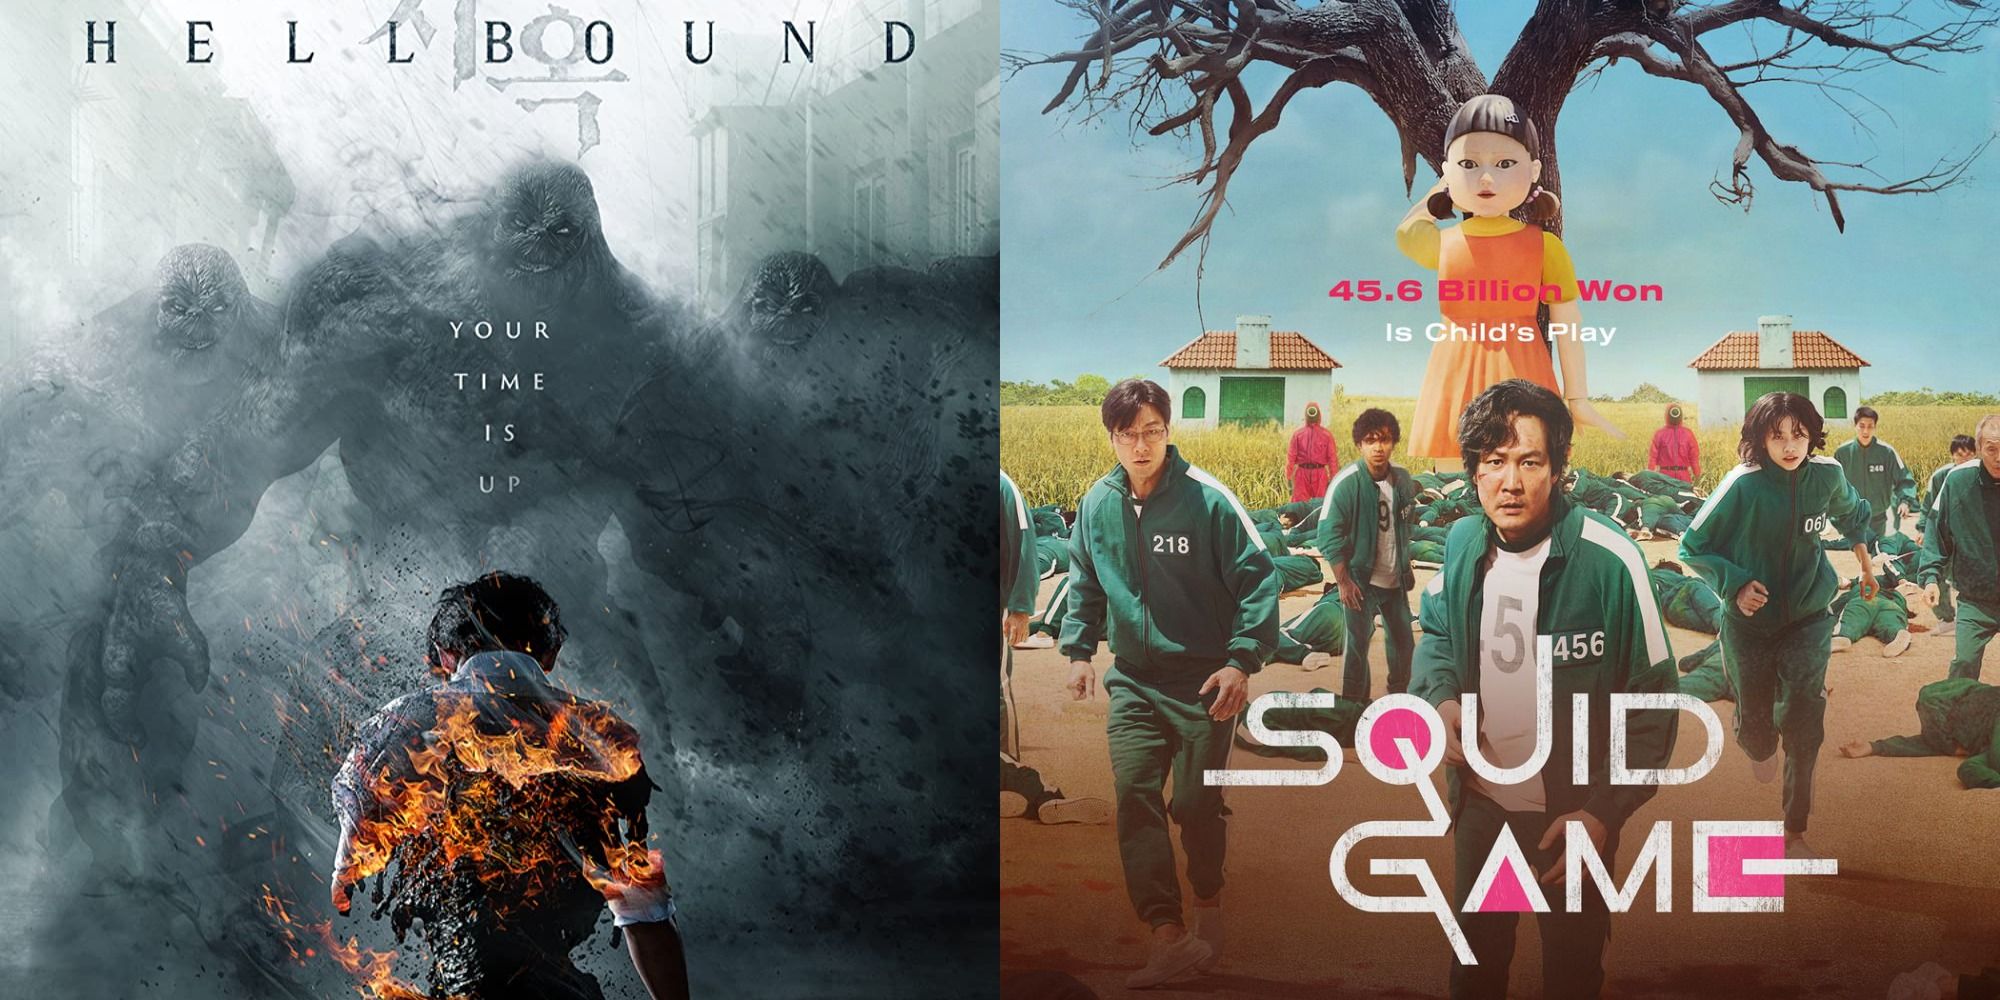 Split image showing posters for the Netflix shows Hellbound and Squid Game